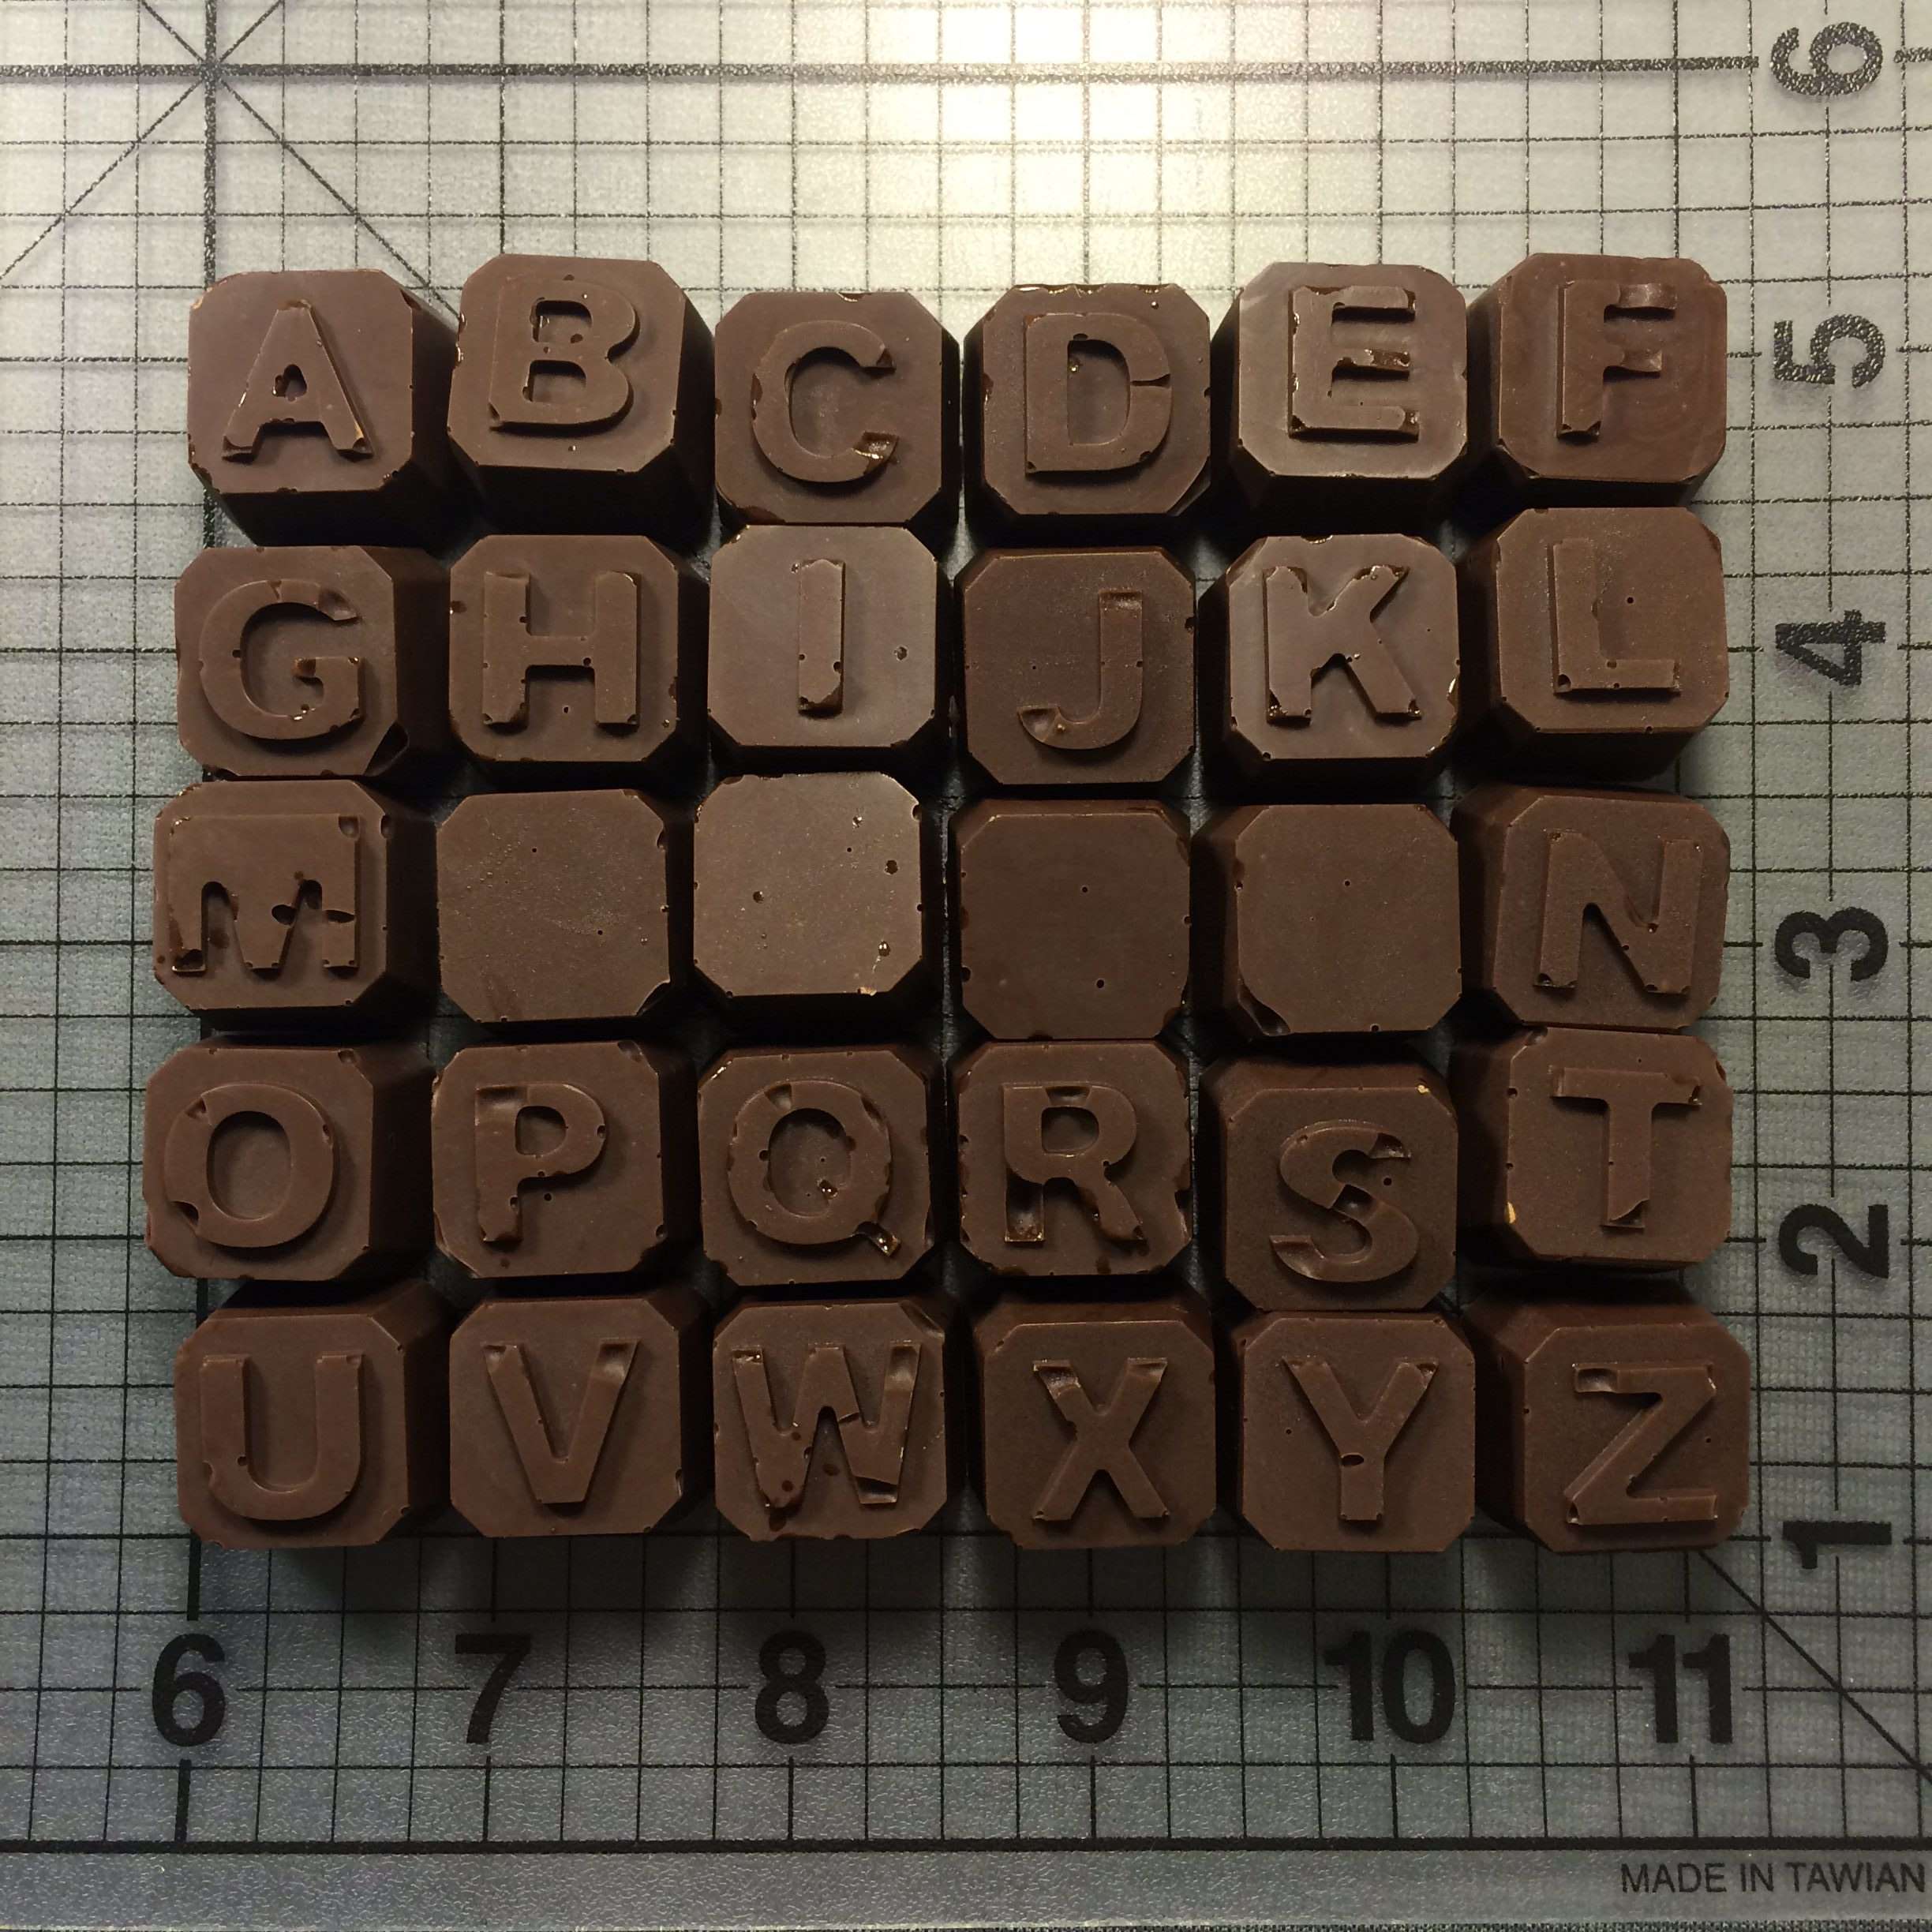  Chocolate Molds Silicone, Letter Molds for Chocolate, Edible  Letter Number for Cake Decorating, Letter Alphabet Heart Molds : Home &  Kitchen